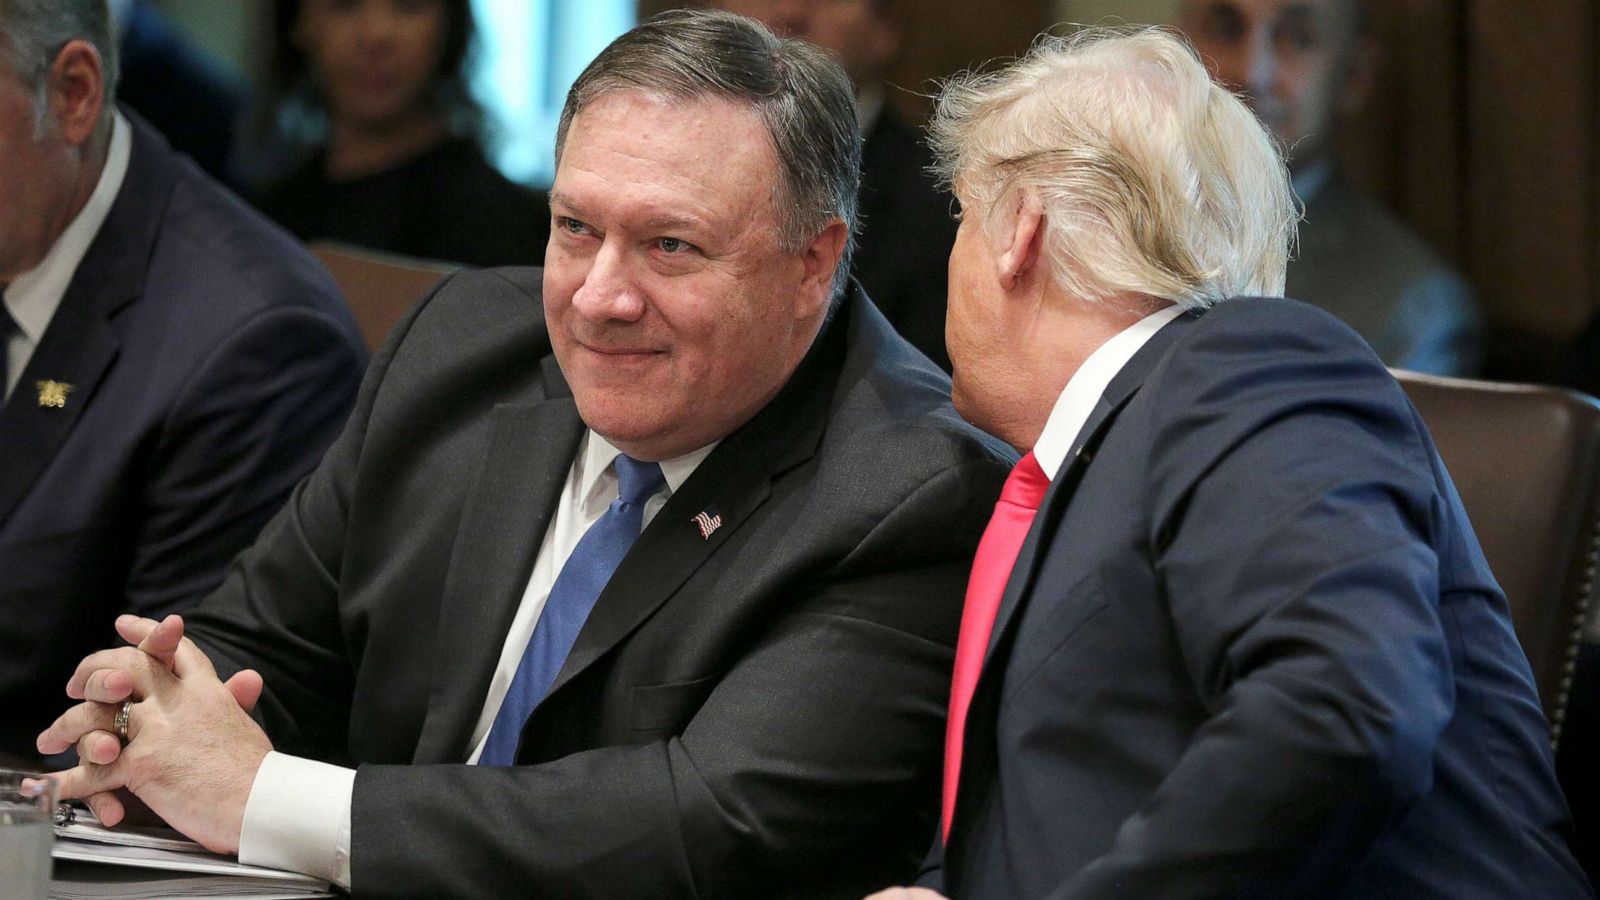 Pompeo says rejoining Iran nuke deal will increase insecurity in the region  